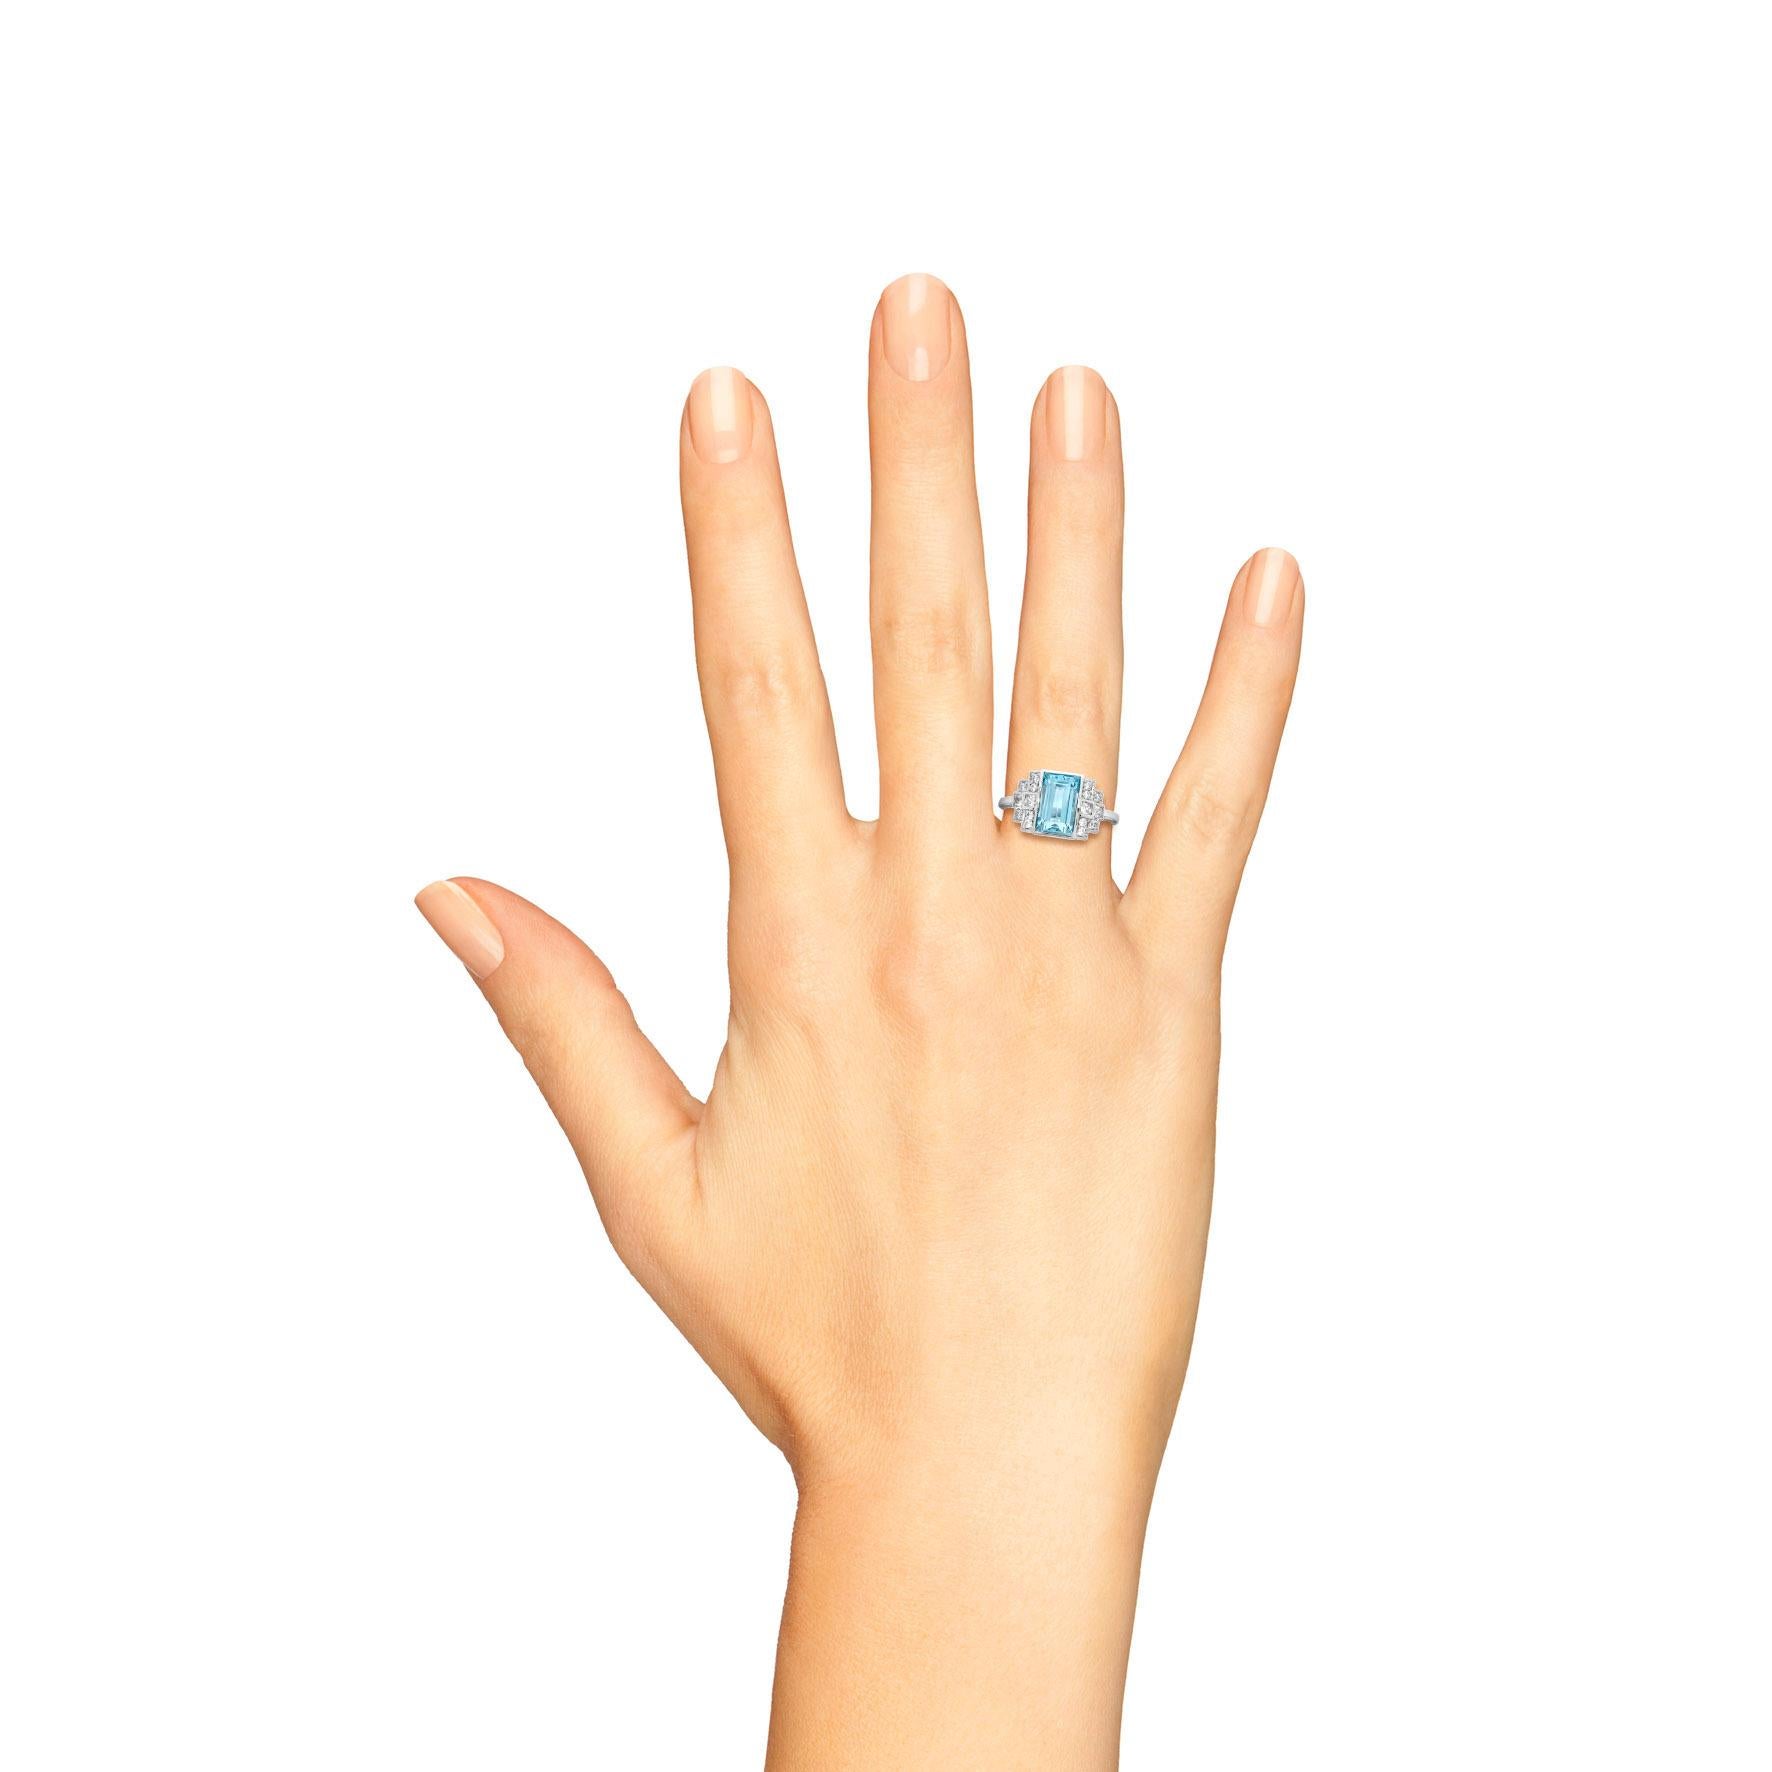 A magnificent Art Deco style cocktail ring boasting a gorgeous emerald cut aquamarine bezel set in a white gold gallery. The center stone is weighed 3.50 carat and has a calming clear blue hue. The stepped shoulders are adorned with square and round